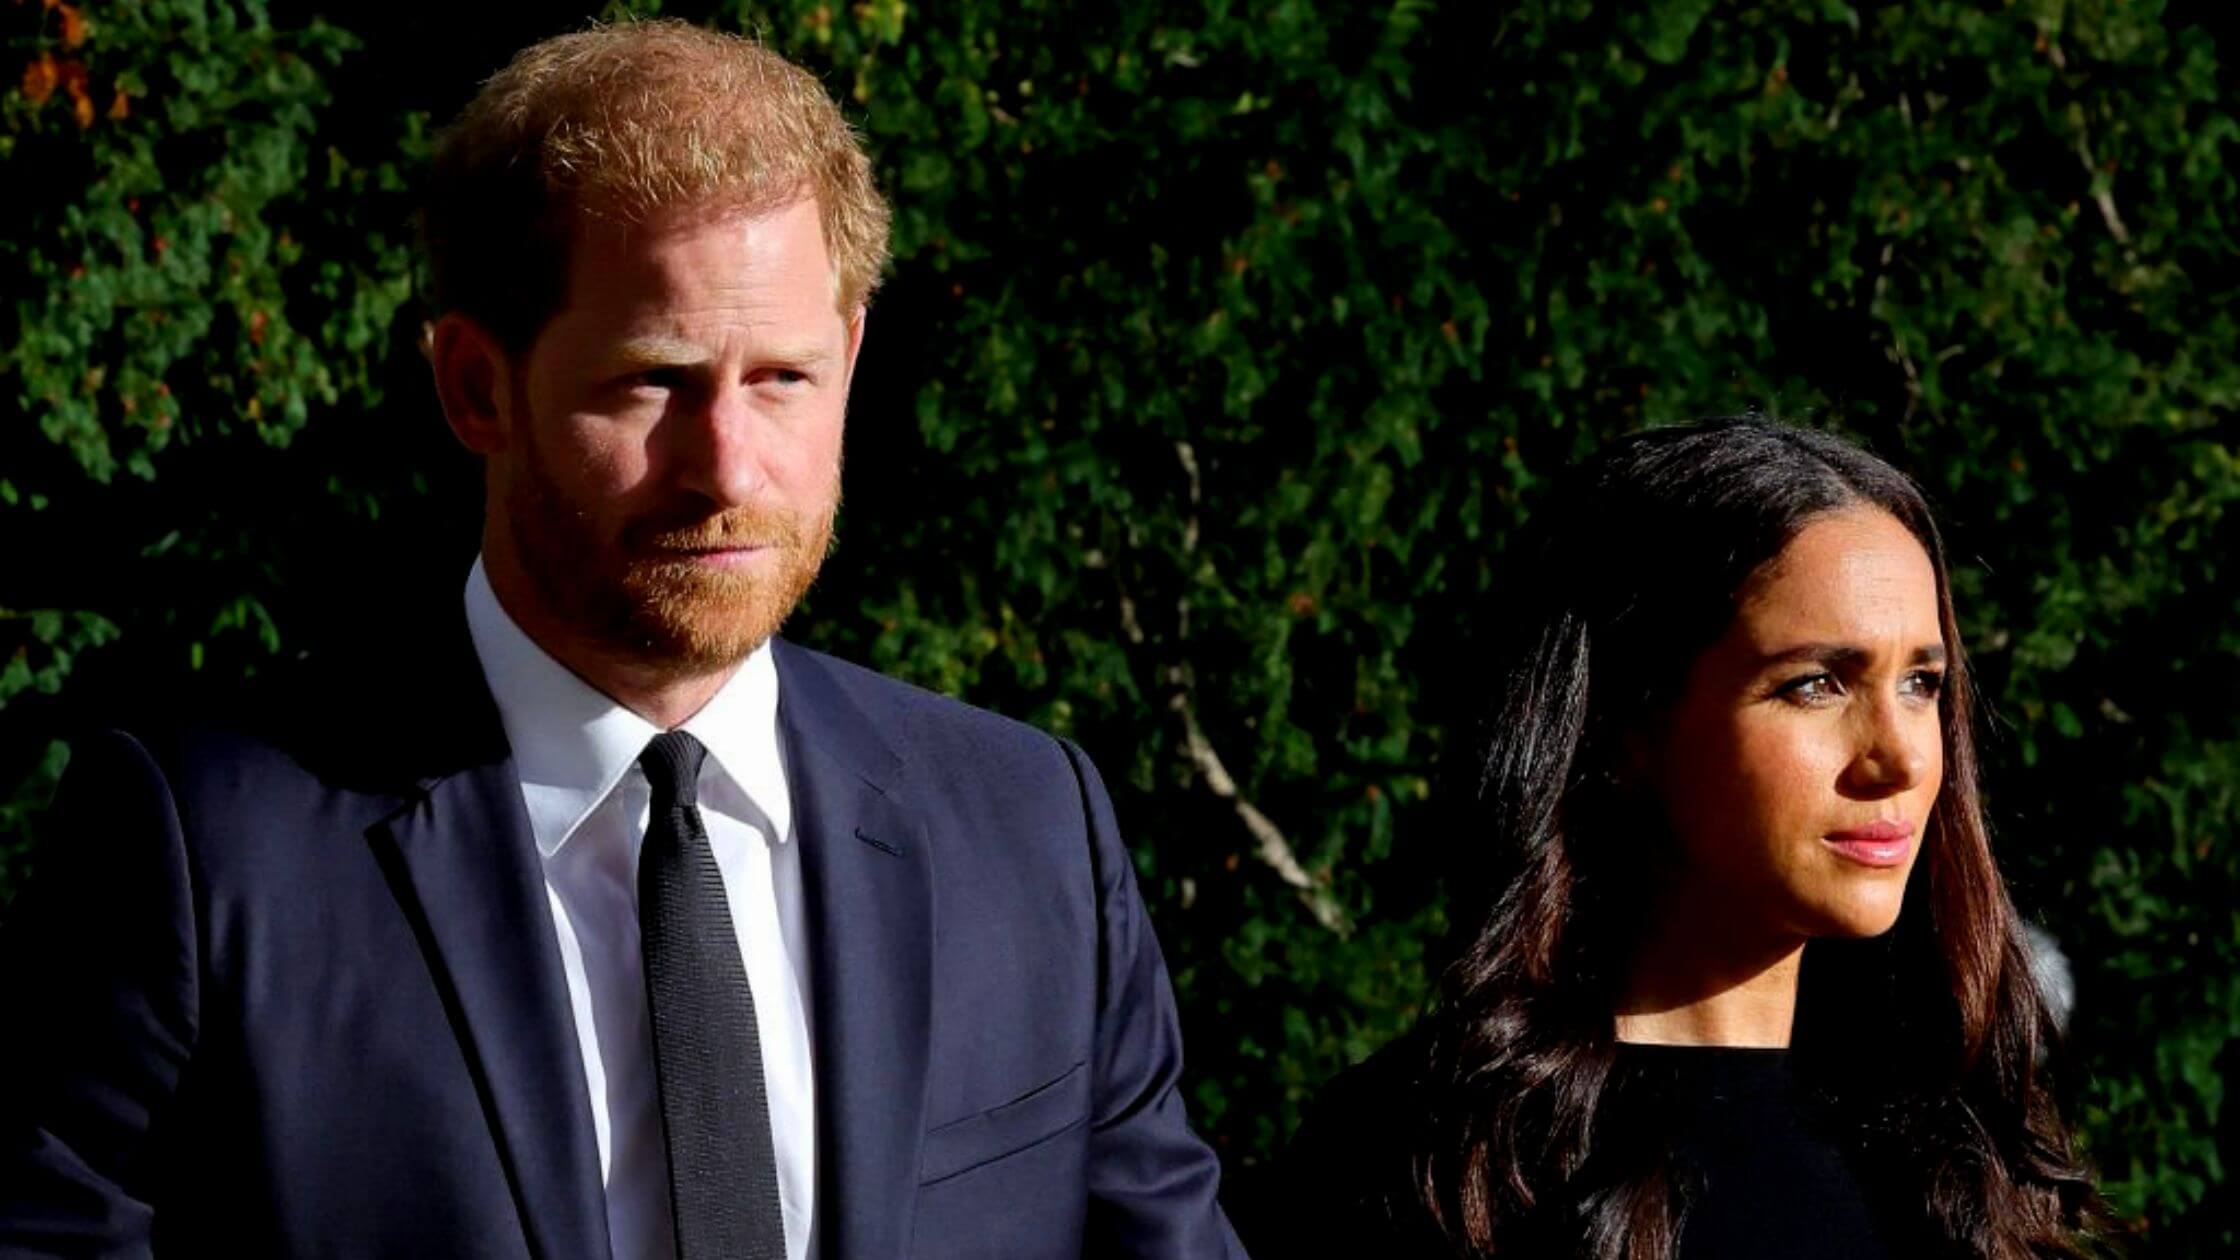 GB News Causes A Stir As Expert Says Meghan And Harry ‘Milking Diana’s Legacy’